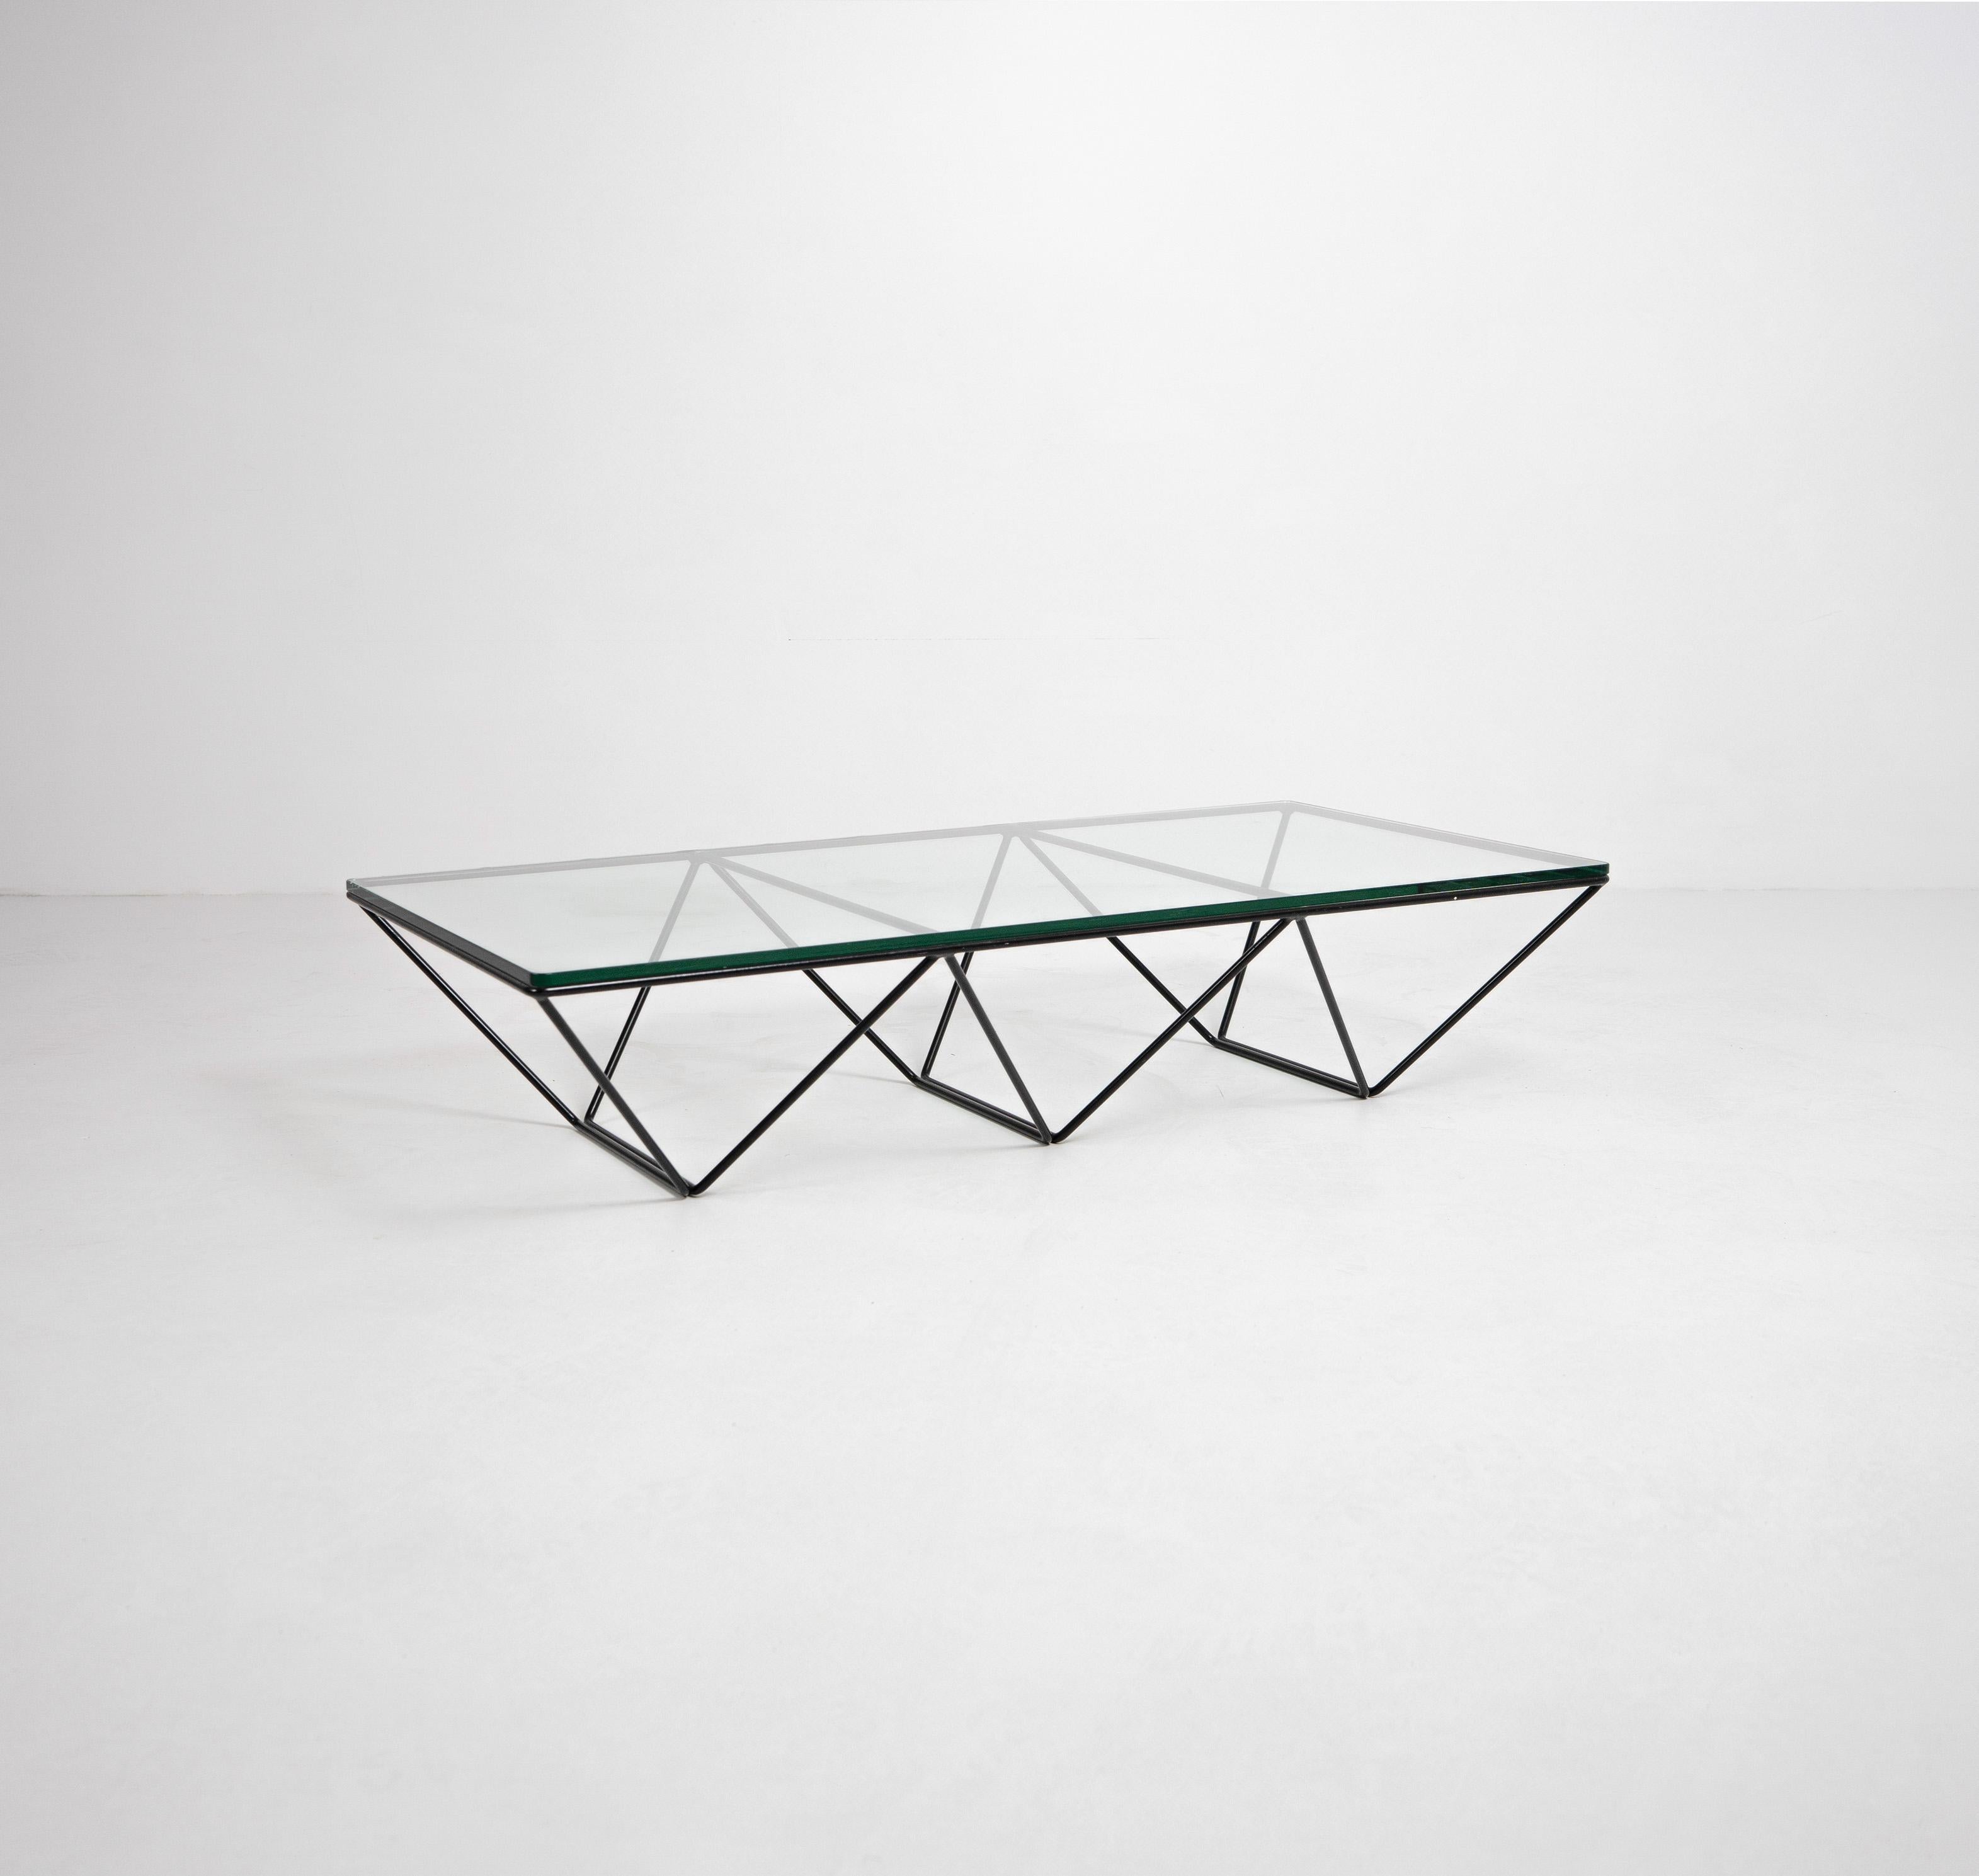 A rectangular 'Alanda' coffee table designed by Paolo Piva and produced by B&B Italia, c.1980. Composed from a minimalist iron base of geometric form and a thick glass top. 

Dimensions (cm, approx):
Height: 26
Width: 120
Depth: 60